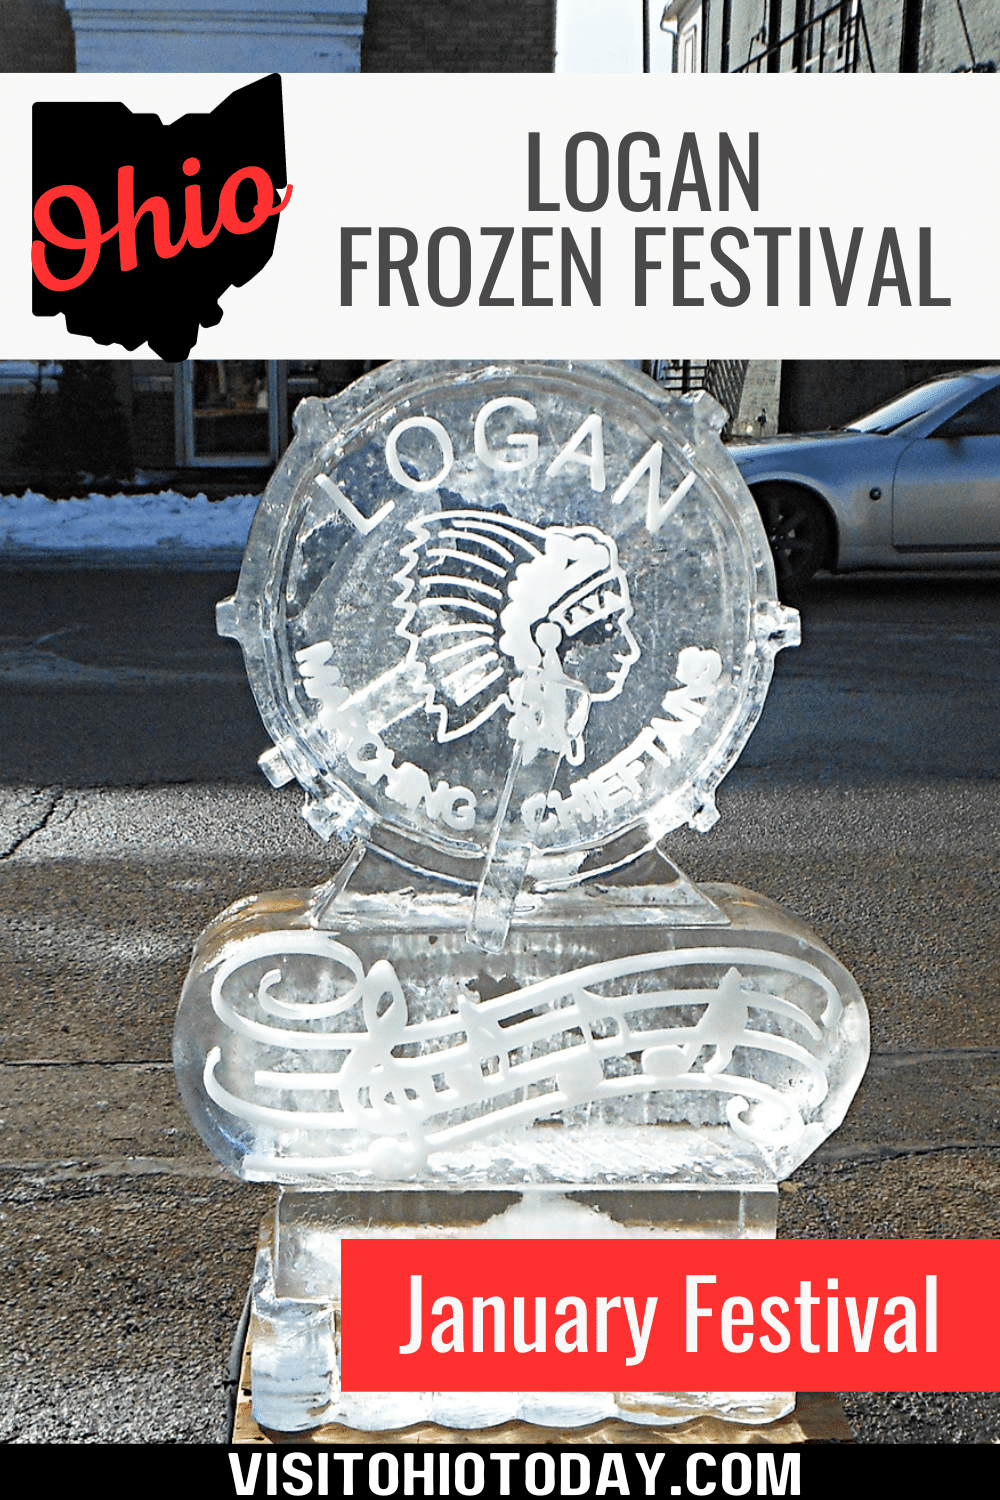 The annual Logan Frozen Festival is a winter event that features ice sculptures on Main Street and lots of family fun. It takes place in historic downtown Logan in January.